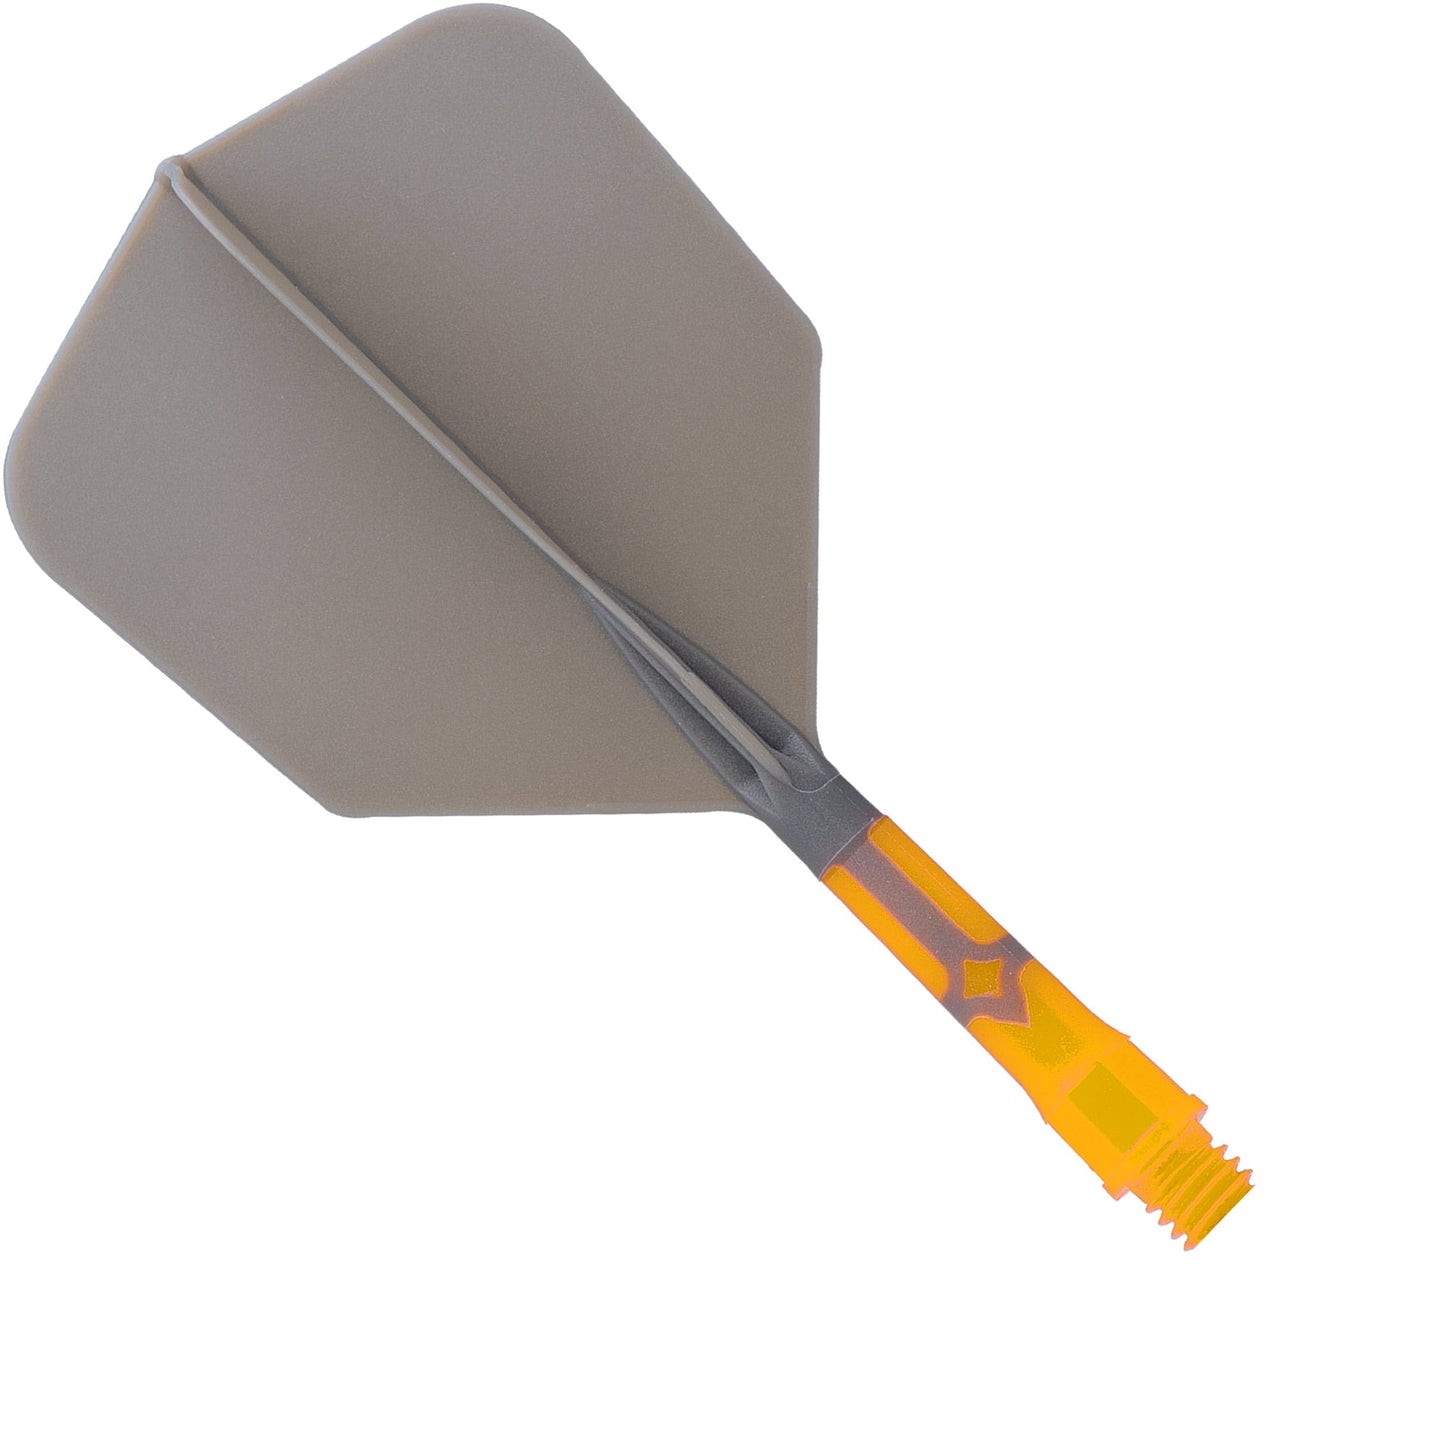 Cuesoul Rost T19 Integrated Dart Shaft and Flights - Big Wing - Yellow with Grey Flight Short